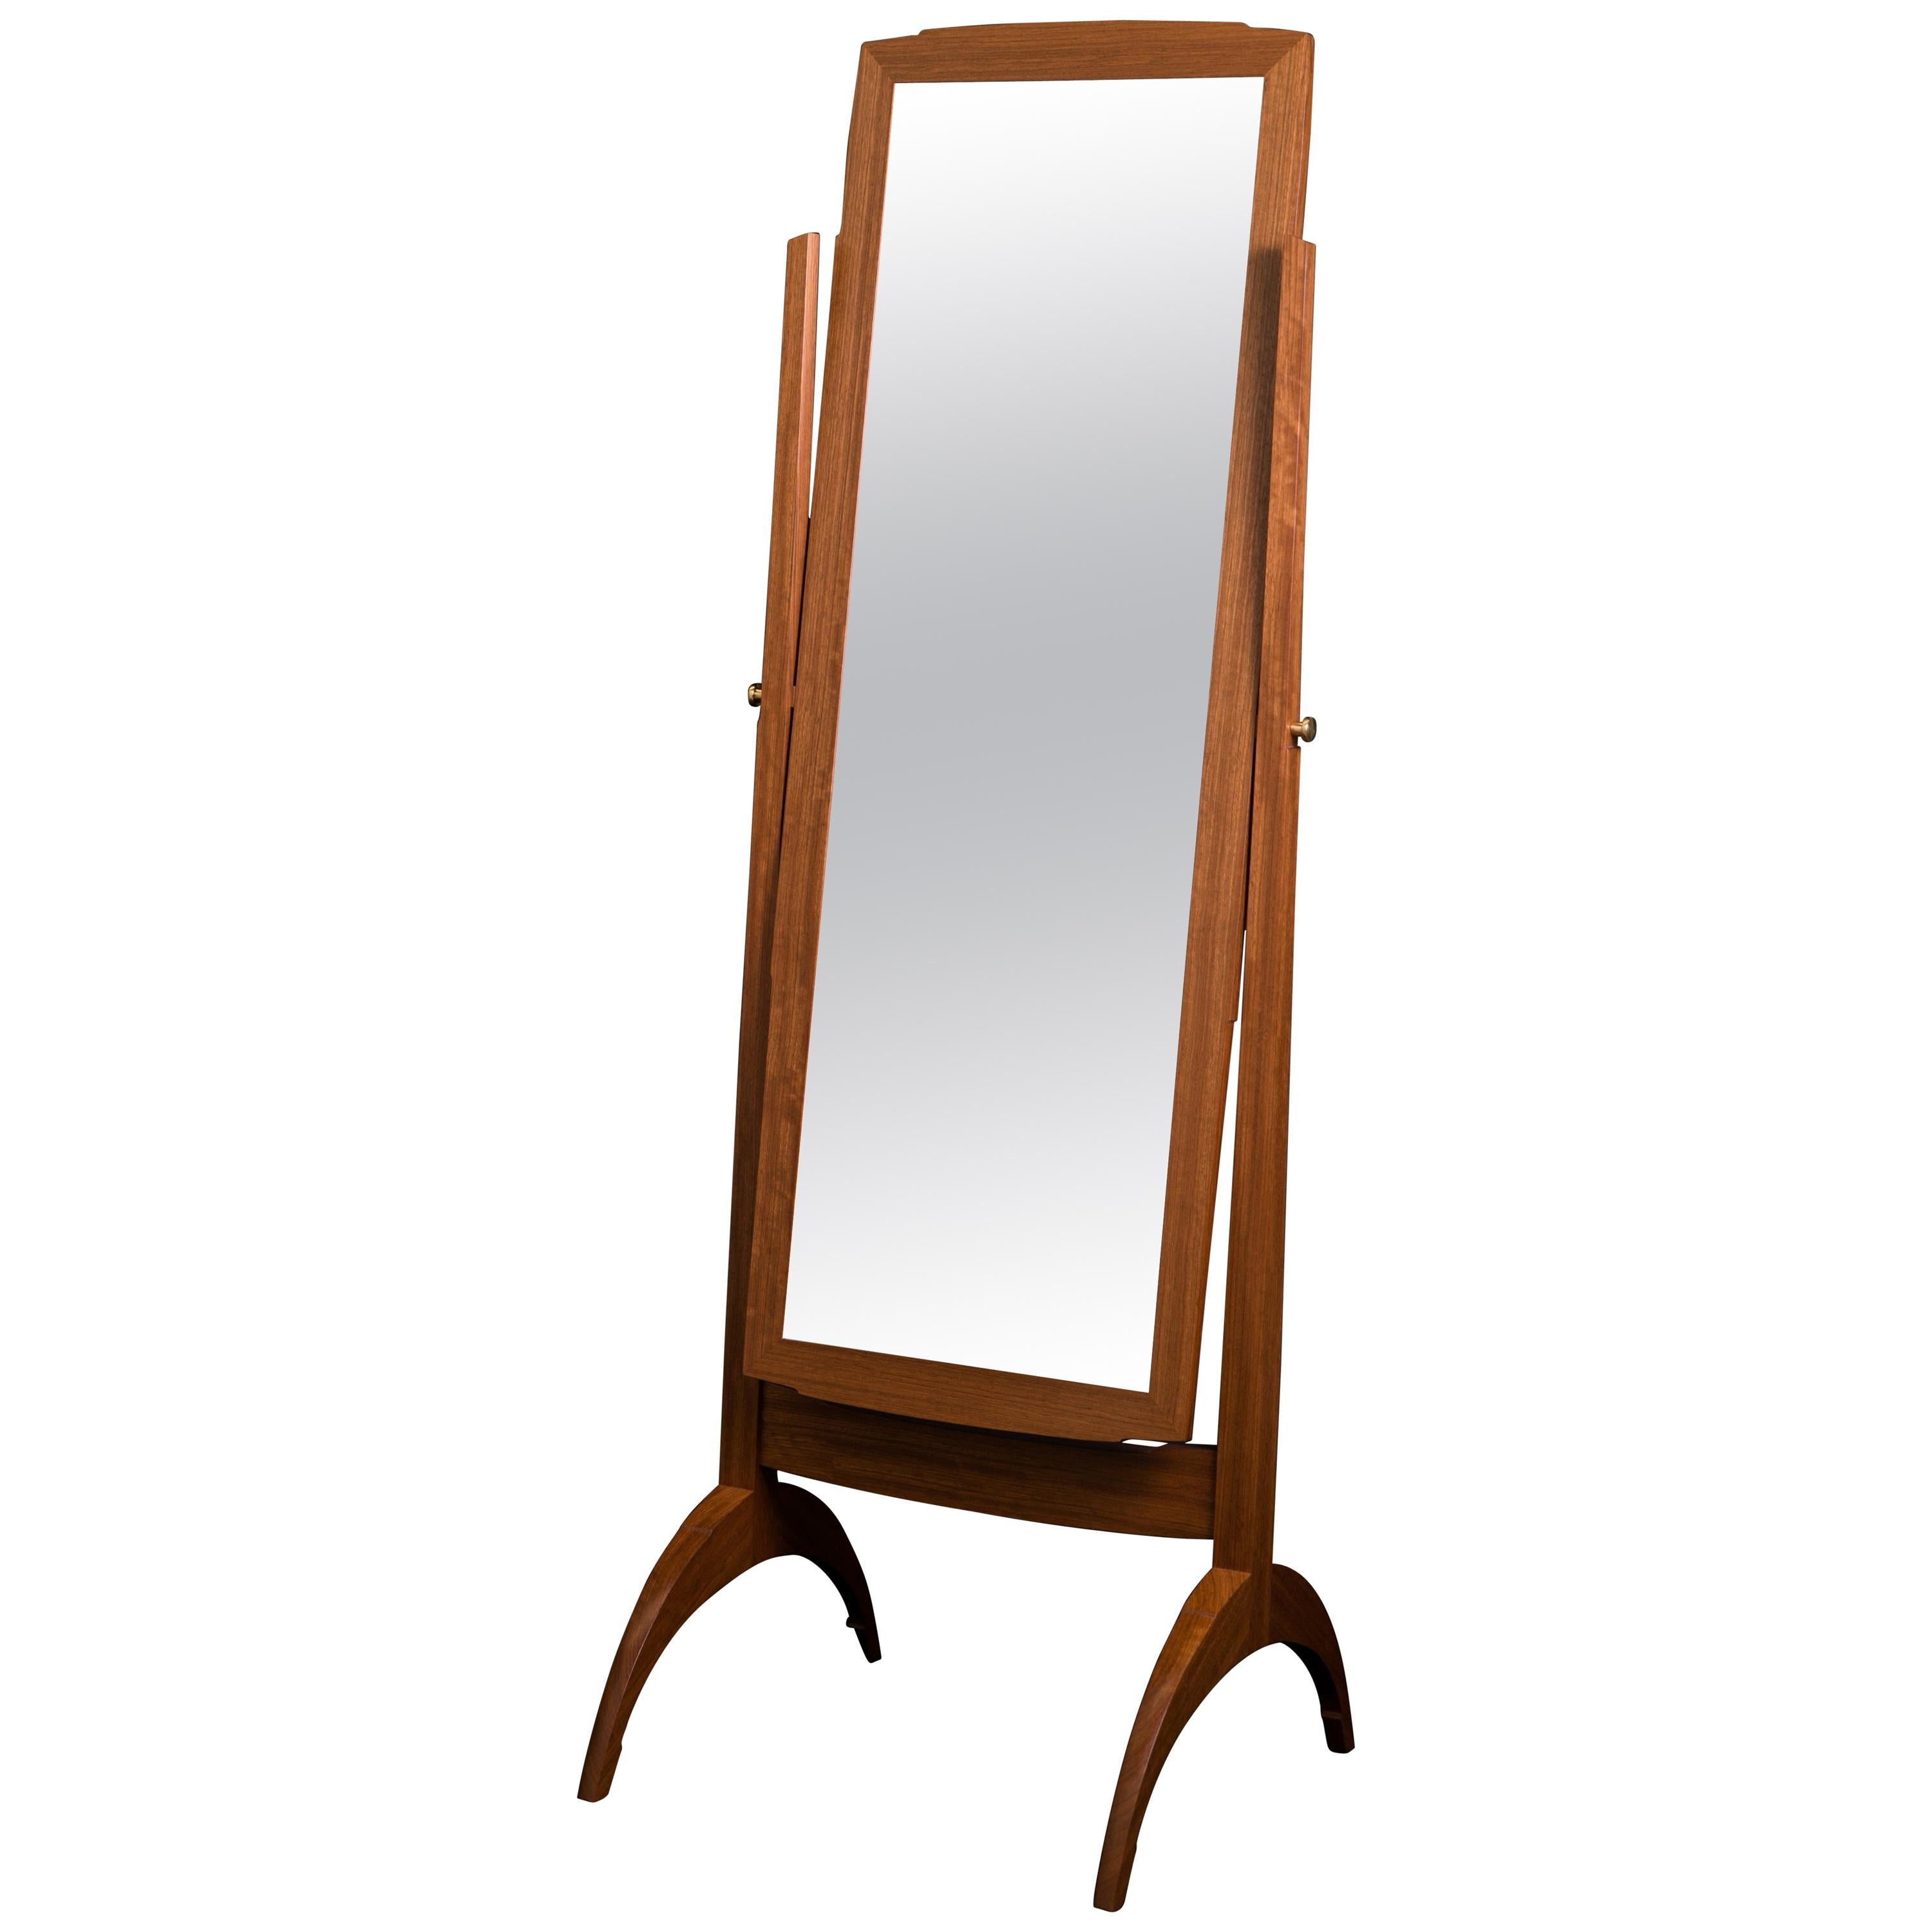 Full-Size Tilting Cheval Mirror in Jatoba and Fabric with Brass Knobs